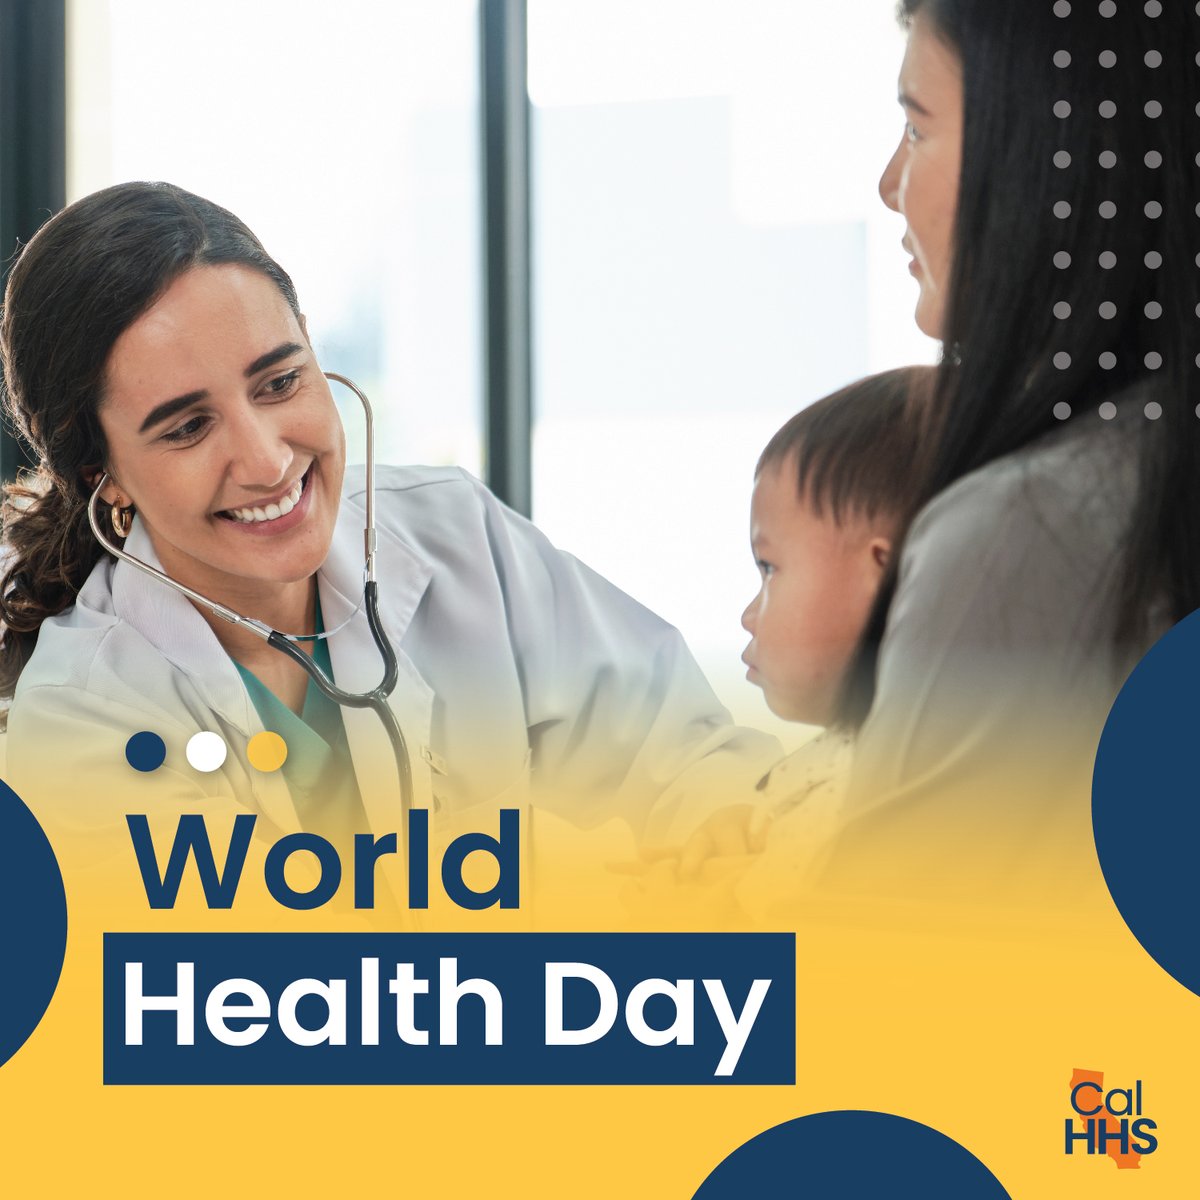 In the Golden State, every day, including #WorldHealthDay, is an opportunity to continue our collective work of building a Healthy #CaliforniaForAll. 💚 chhs.ca.gov/guiding-princi…